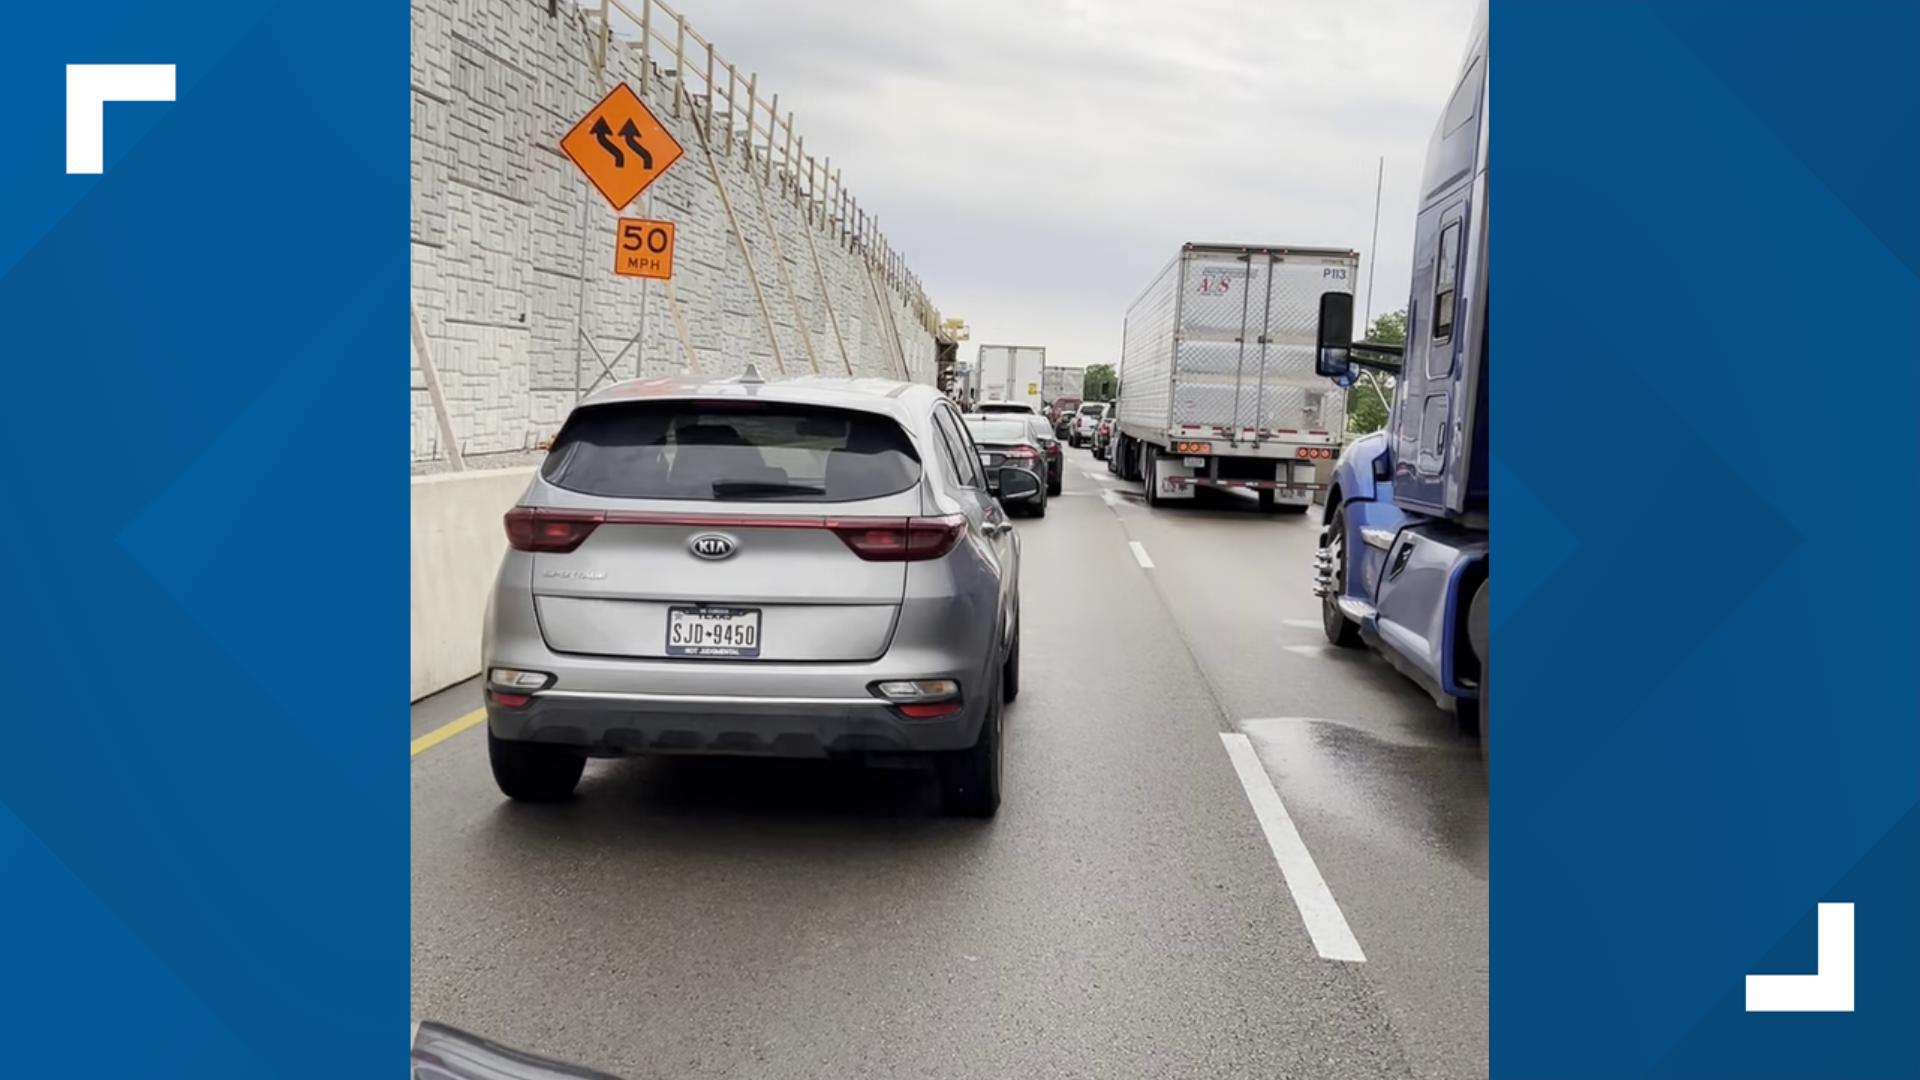 A WFAA viewer said they've been stuck in traffic for more than three hours on I-35 SB in Gainesville.